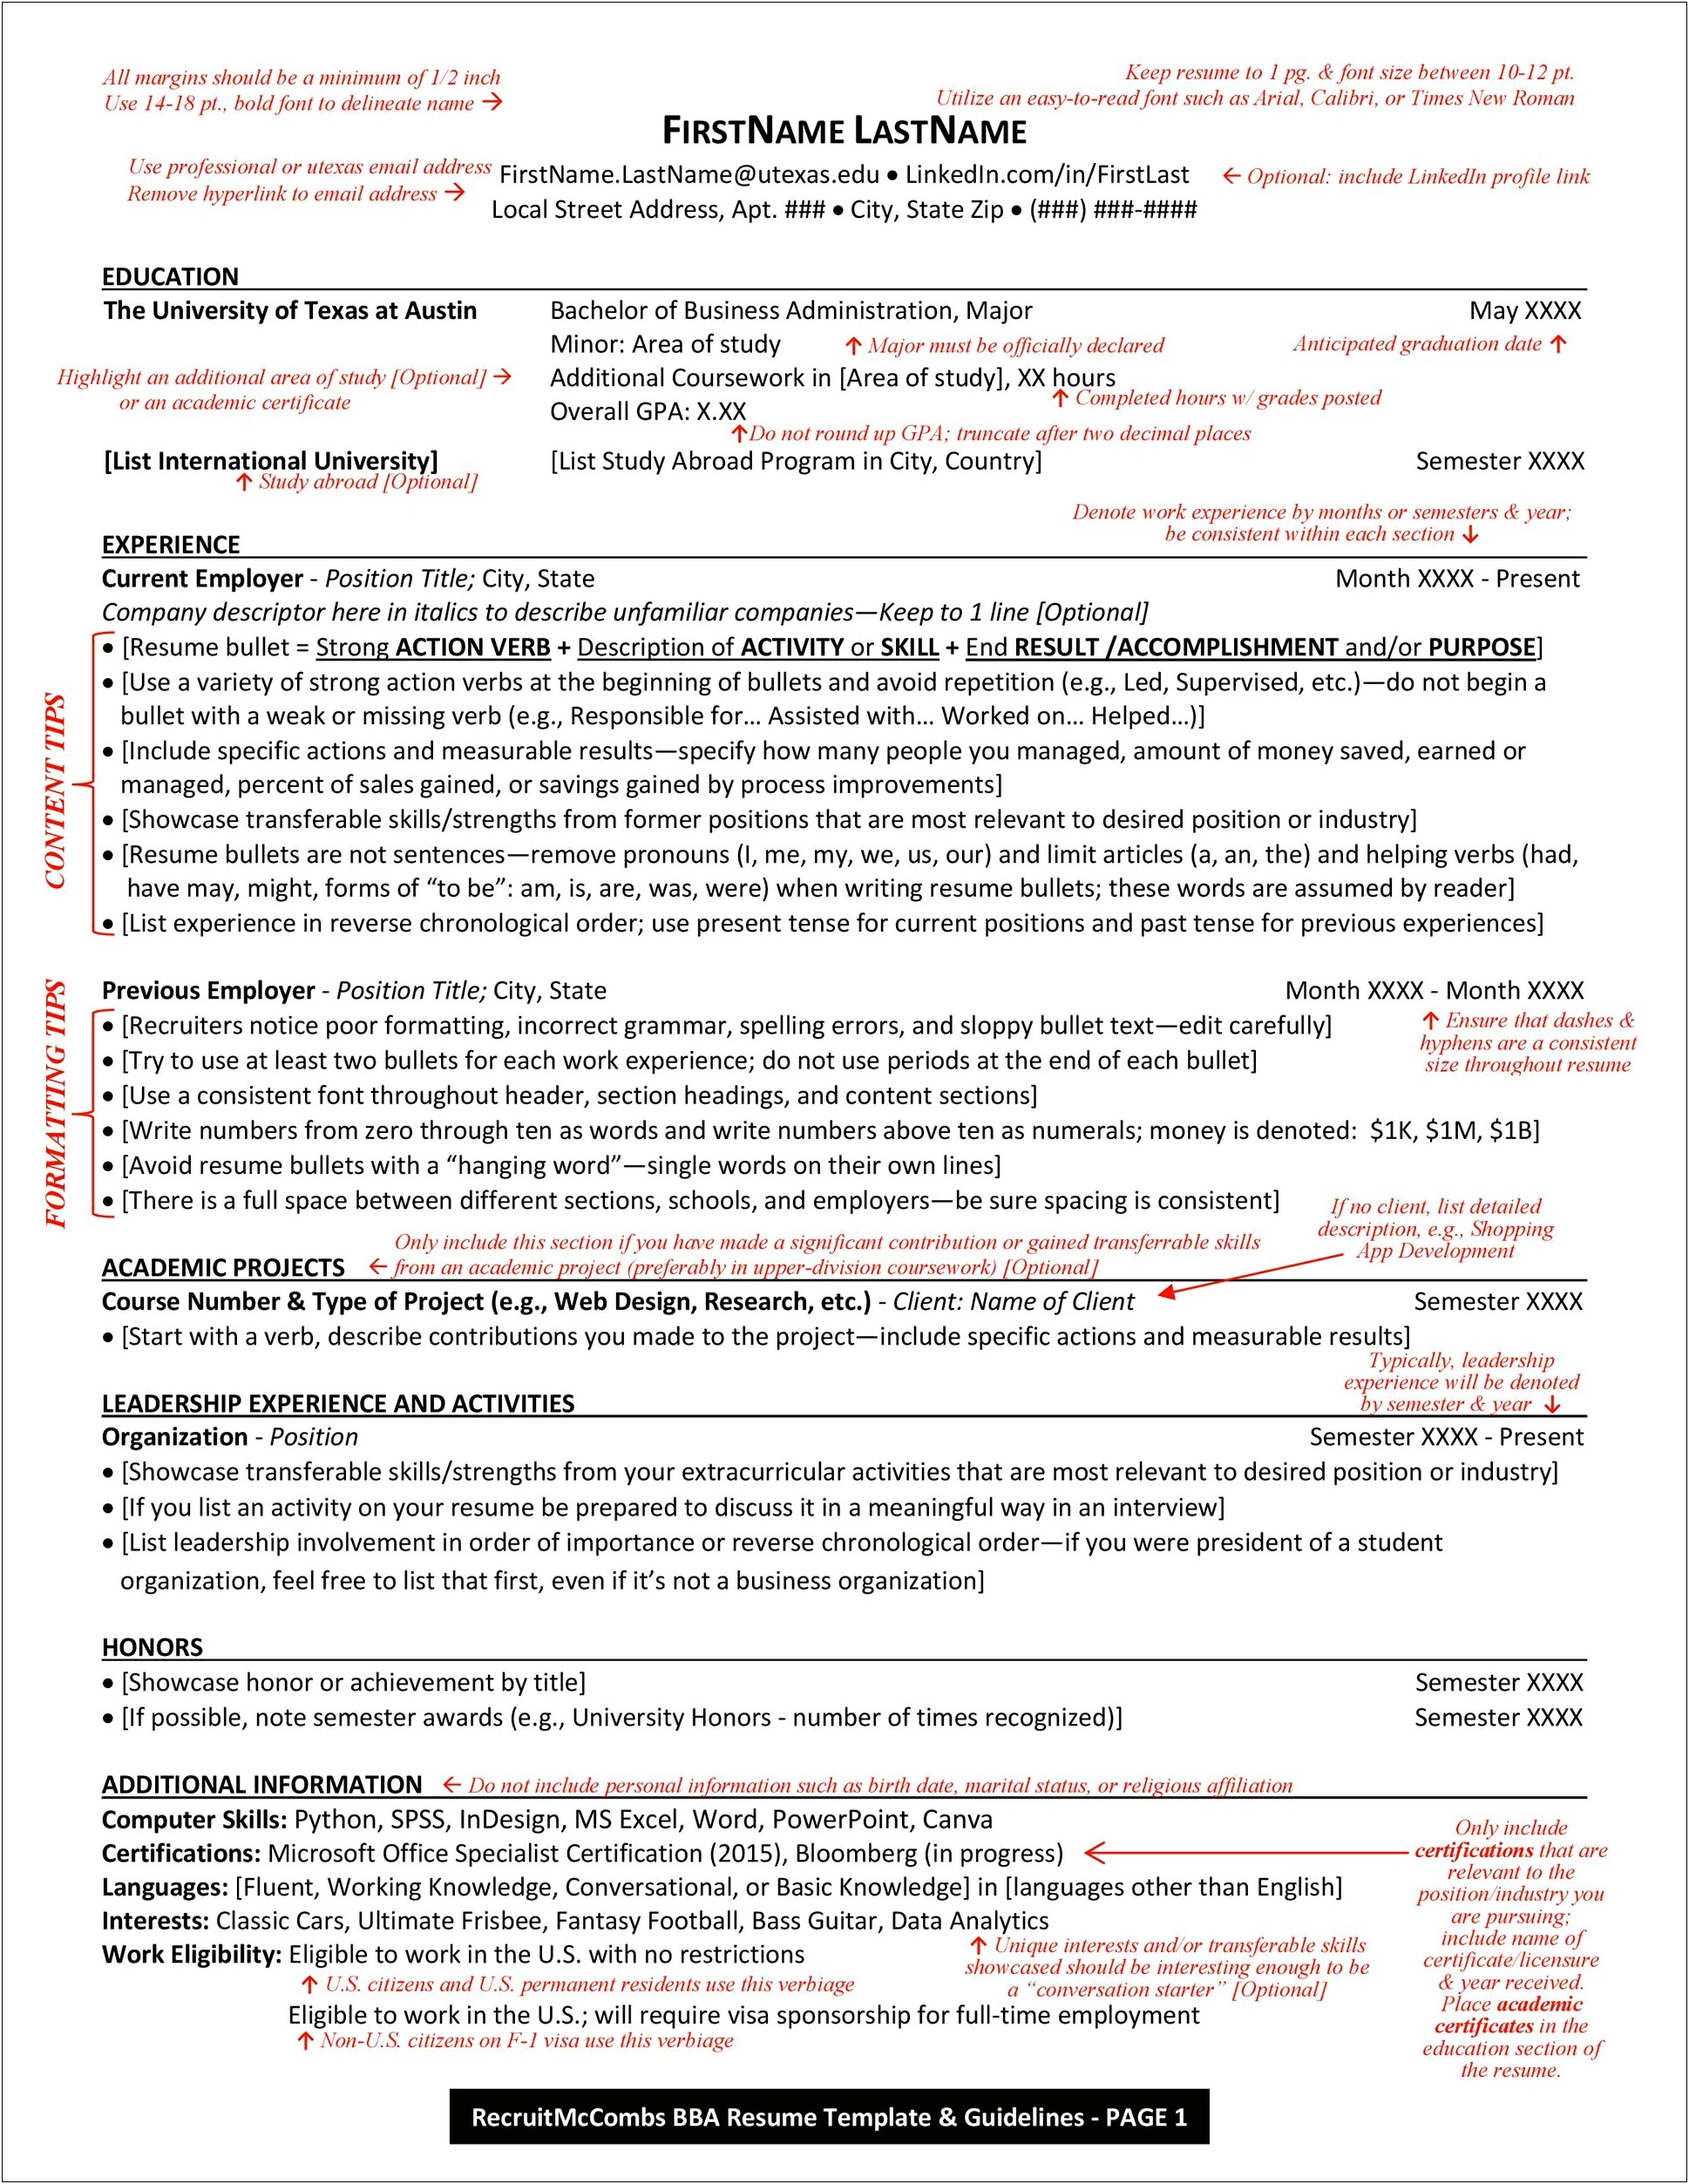 Working Knowledge Of Microsoft Office Resume